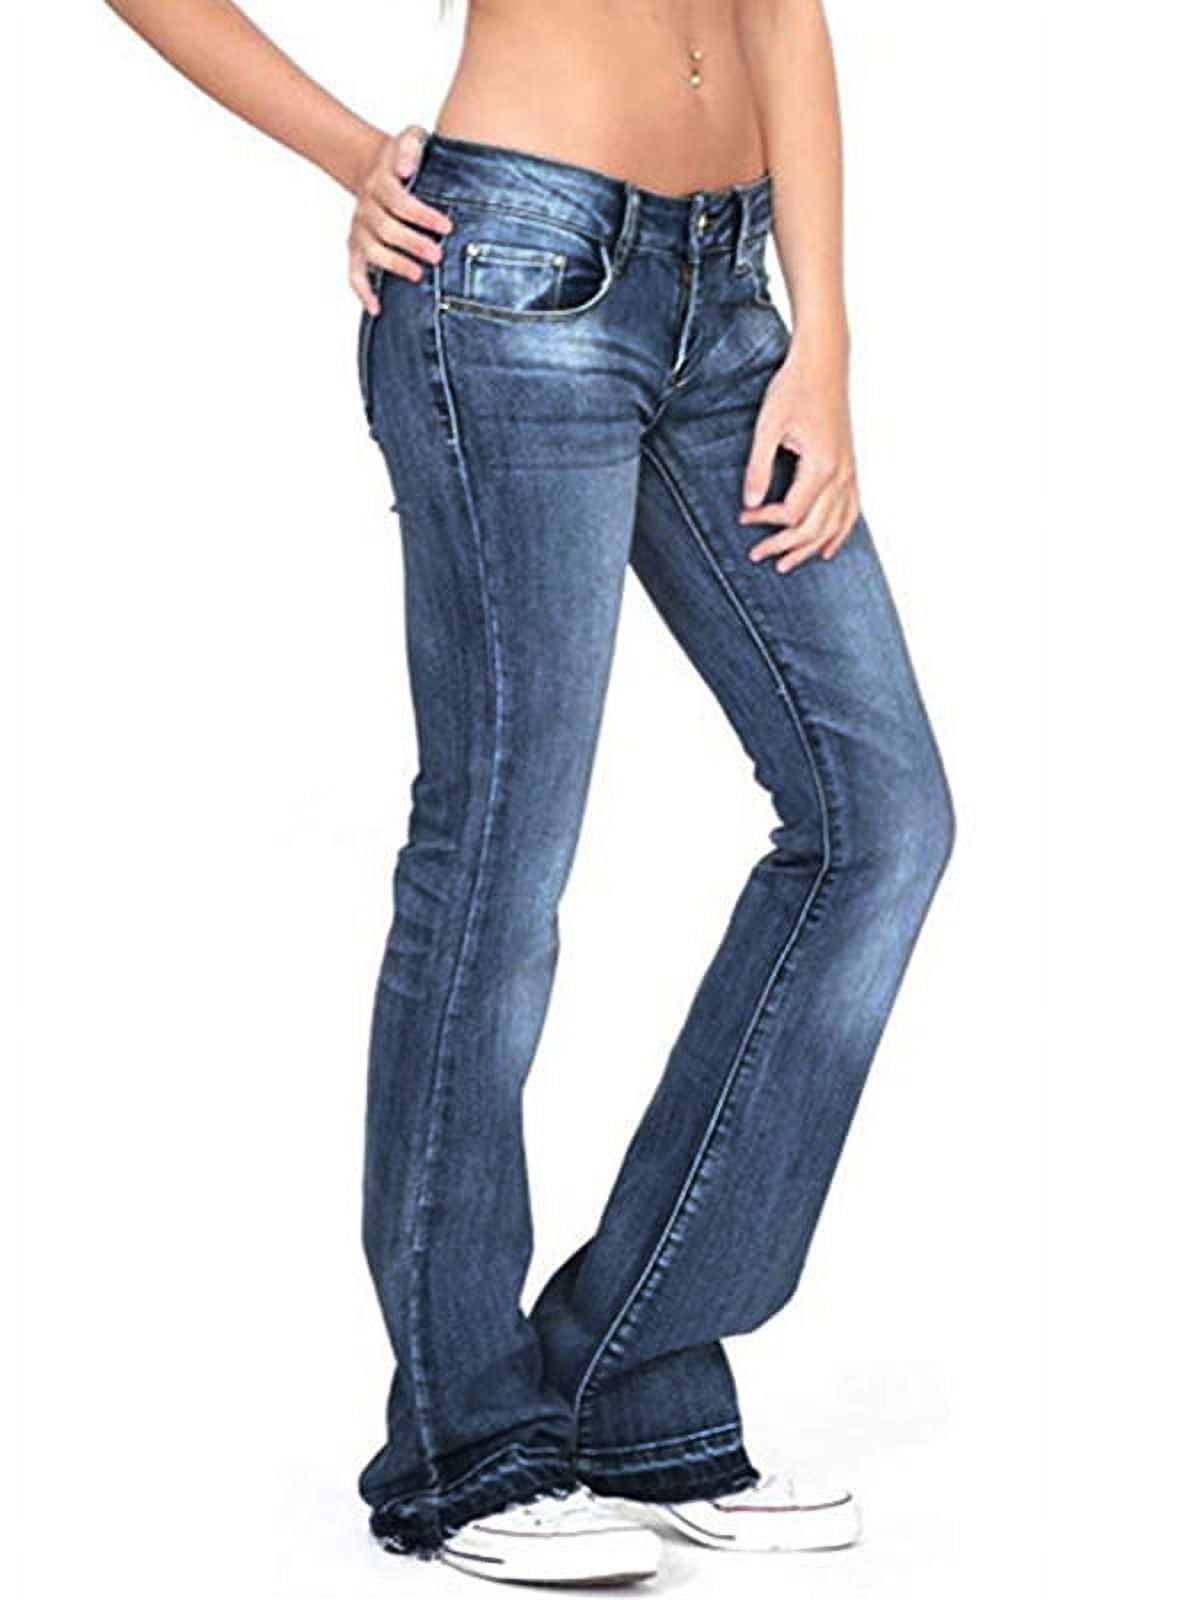 Sexy Dance Womens Low Waist Flared Jeans Bootcut Washed Denim